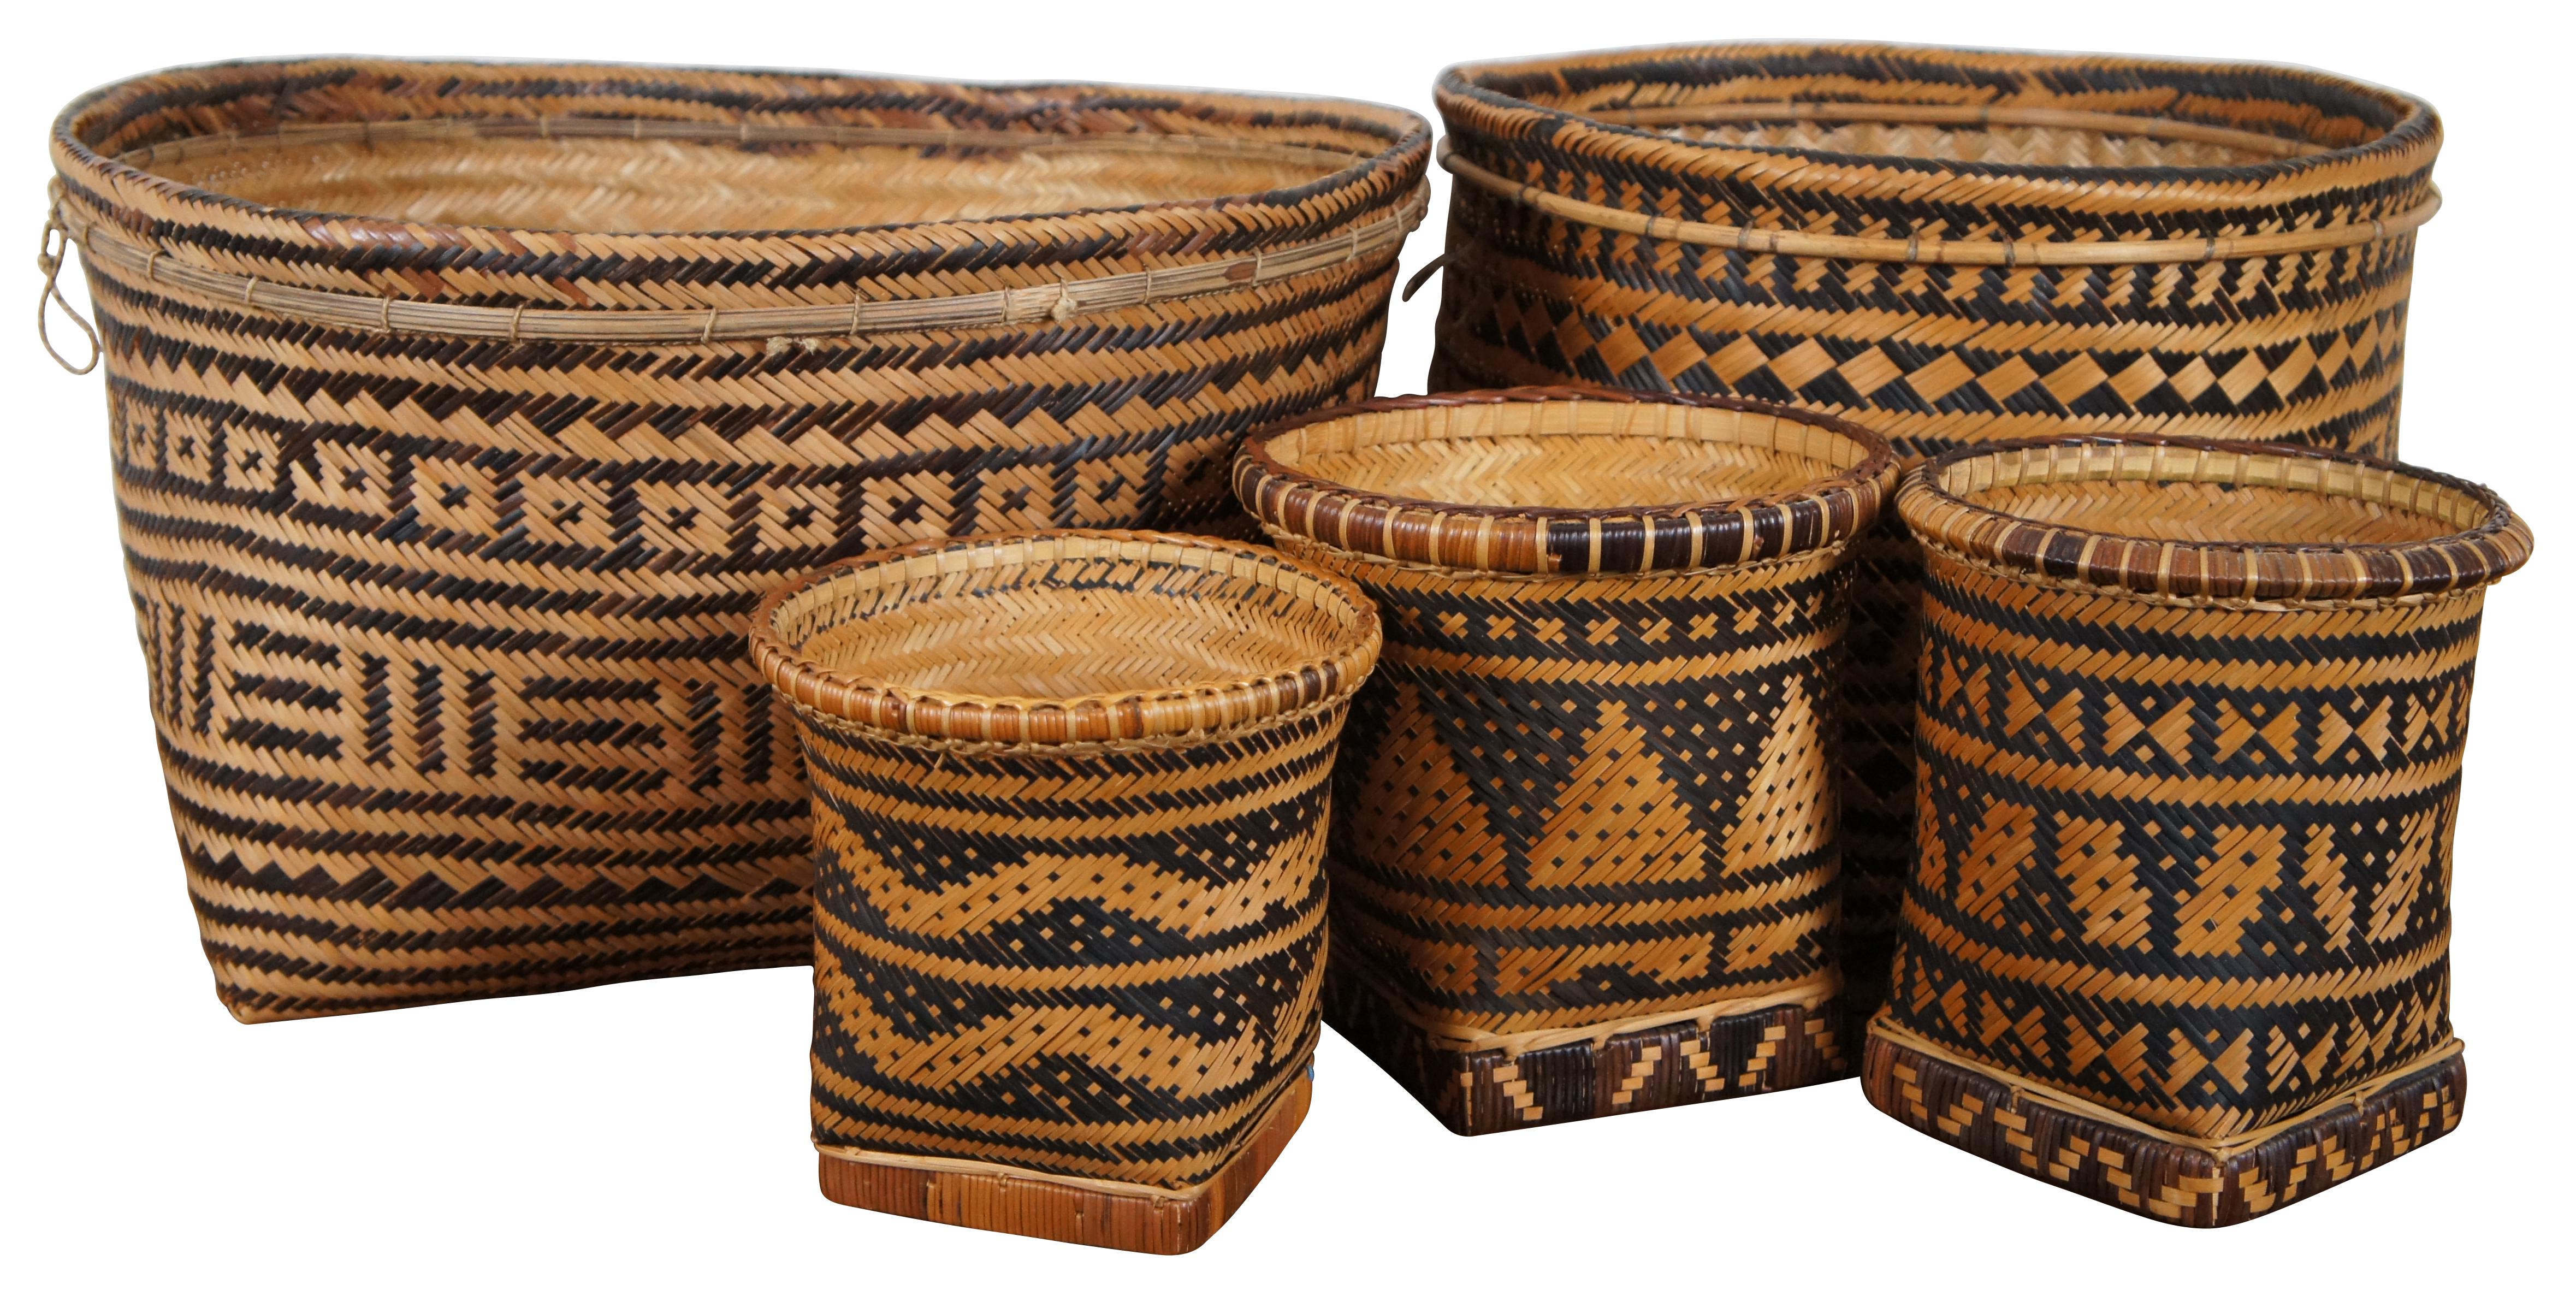 Set of five hand woven two tone, geometric, South American folk art baskets in a variety of sizes for a variety of potential uses from harvest / storage to cachepot / planter. One specifically marked Made in Brazil. 

Measures: 1 large - 17” x